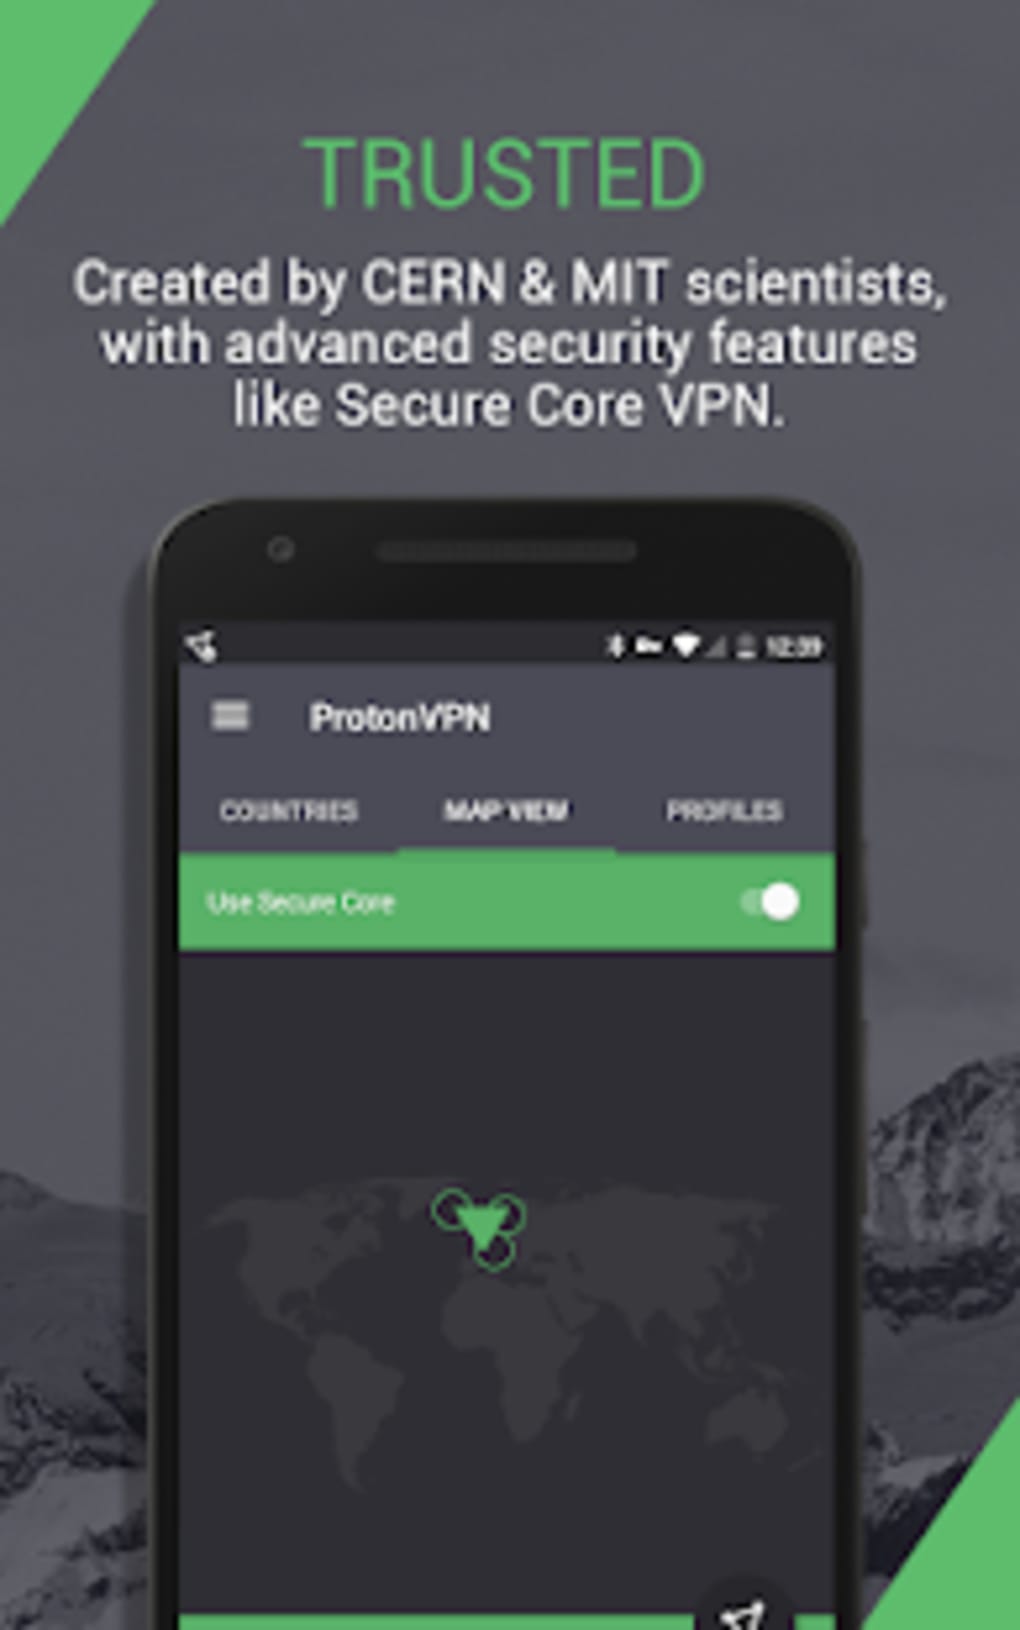 is protonvpn safe to use